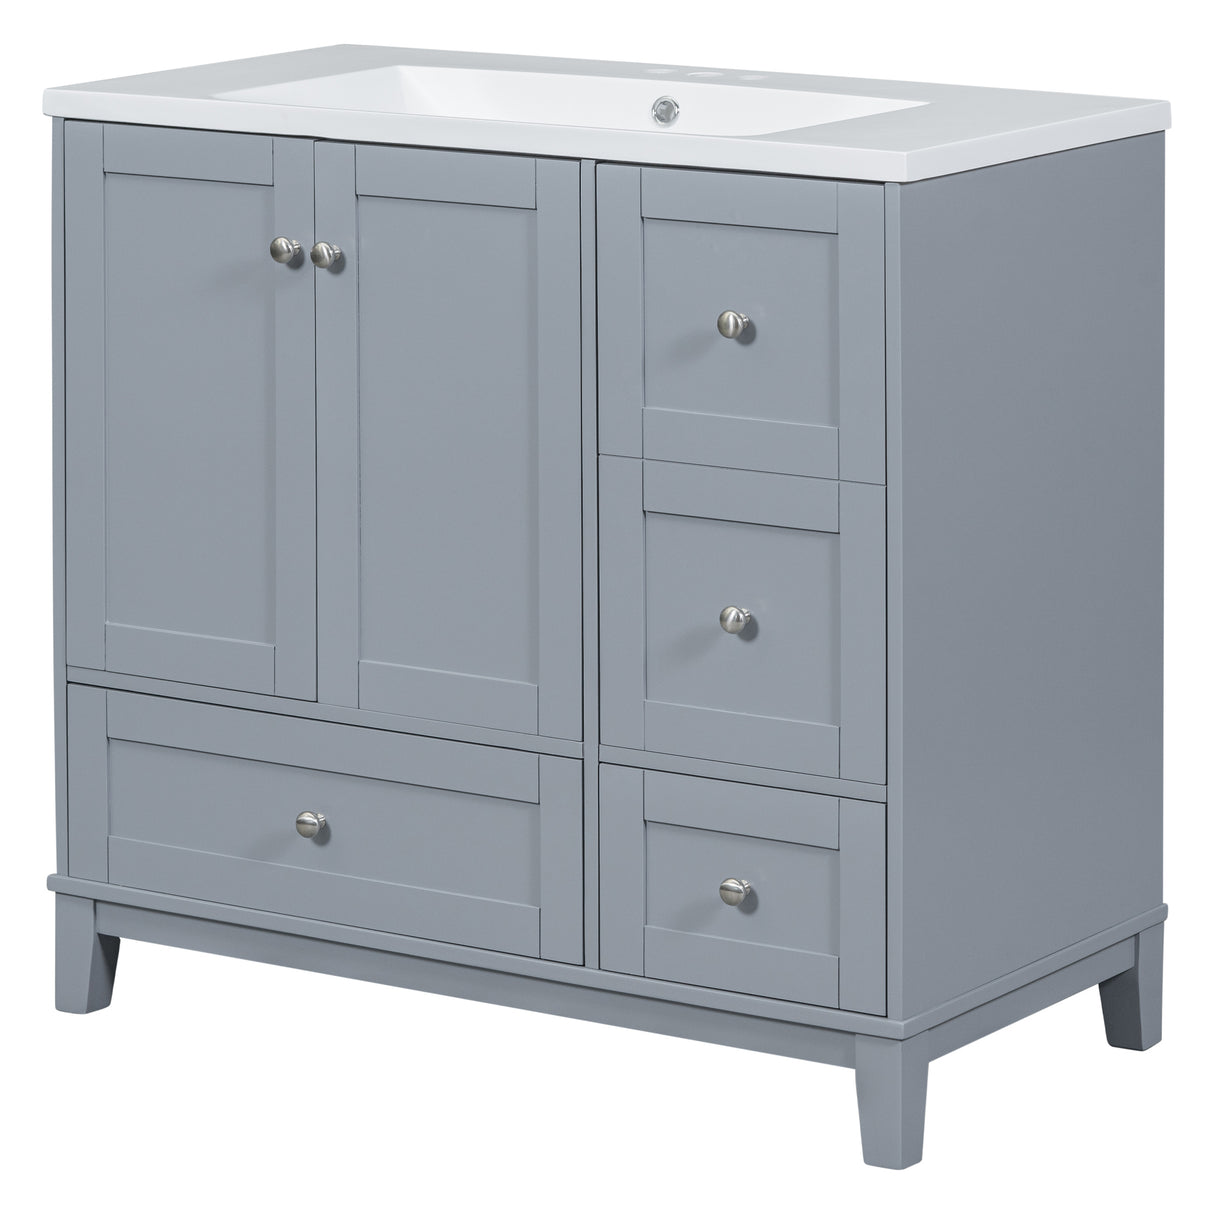 36 Inch Modern Bathroom Vanity with USB Charging, Two Doors and Three Drawers Bathroom Storage Vanity Cabinet with single top, Small Bathroom Vanity cabinet with sink , White & Gray Blue - Faucets Not